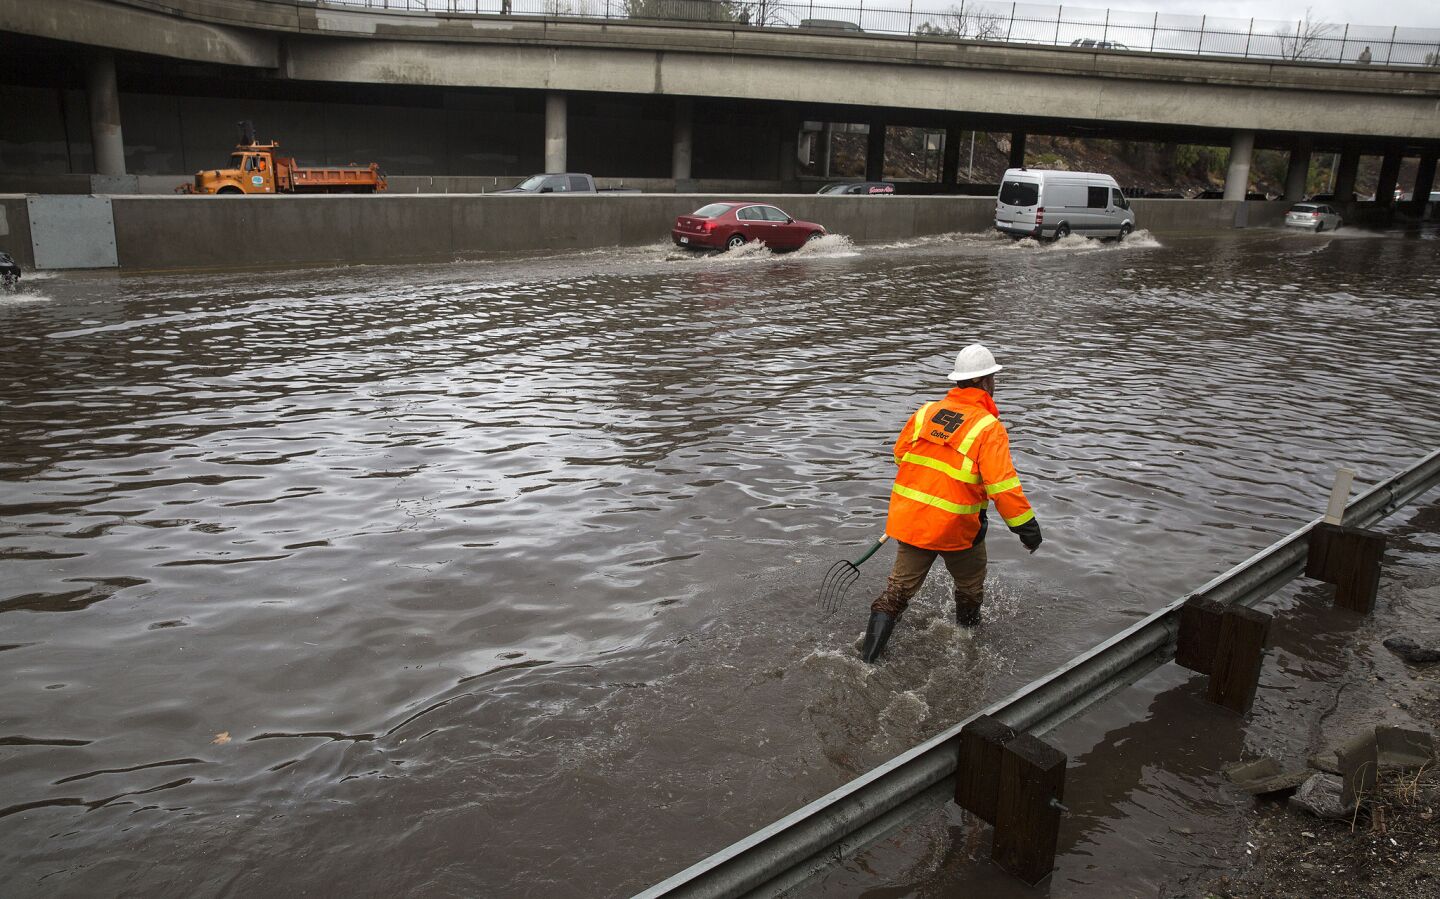 A Caltrans worker toils to clear drains on a flooded Interstate 5 in Sun Valley, Calif.